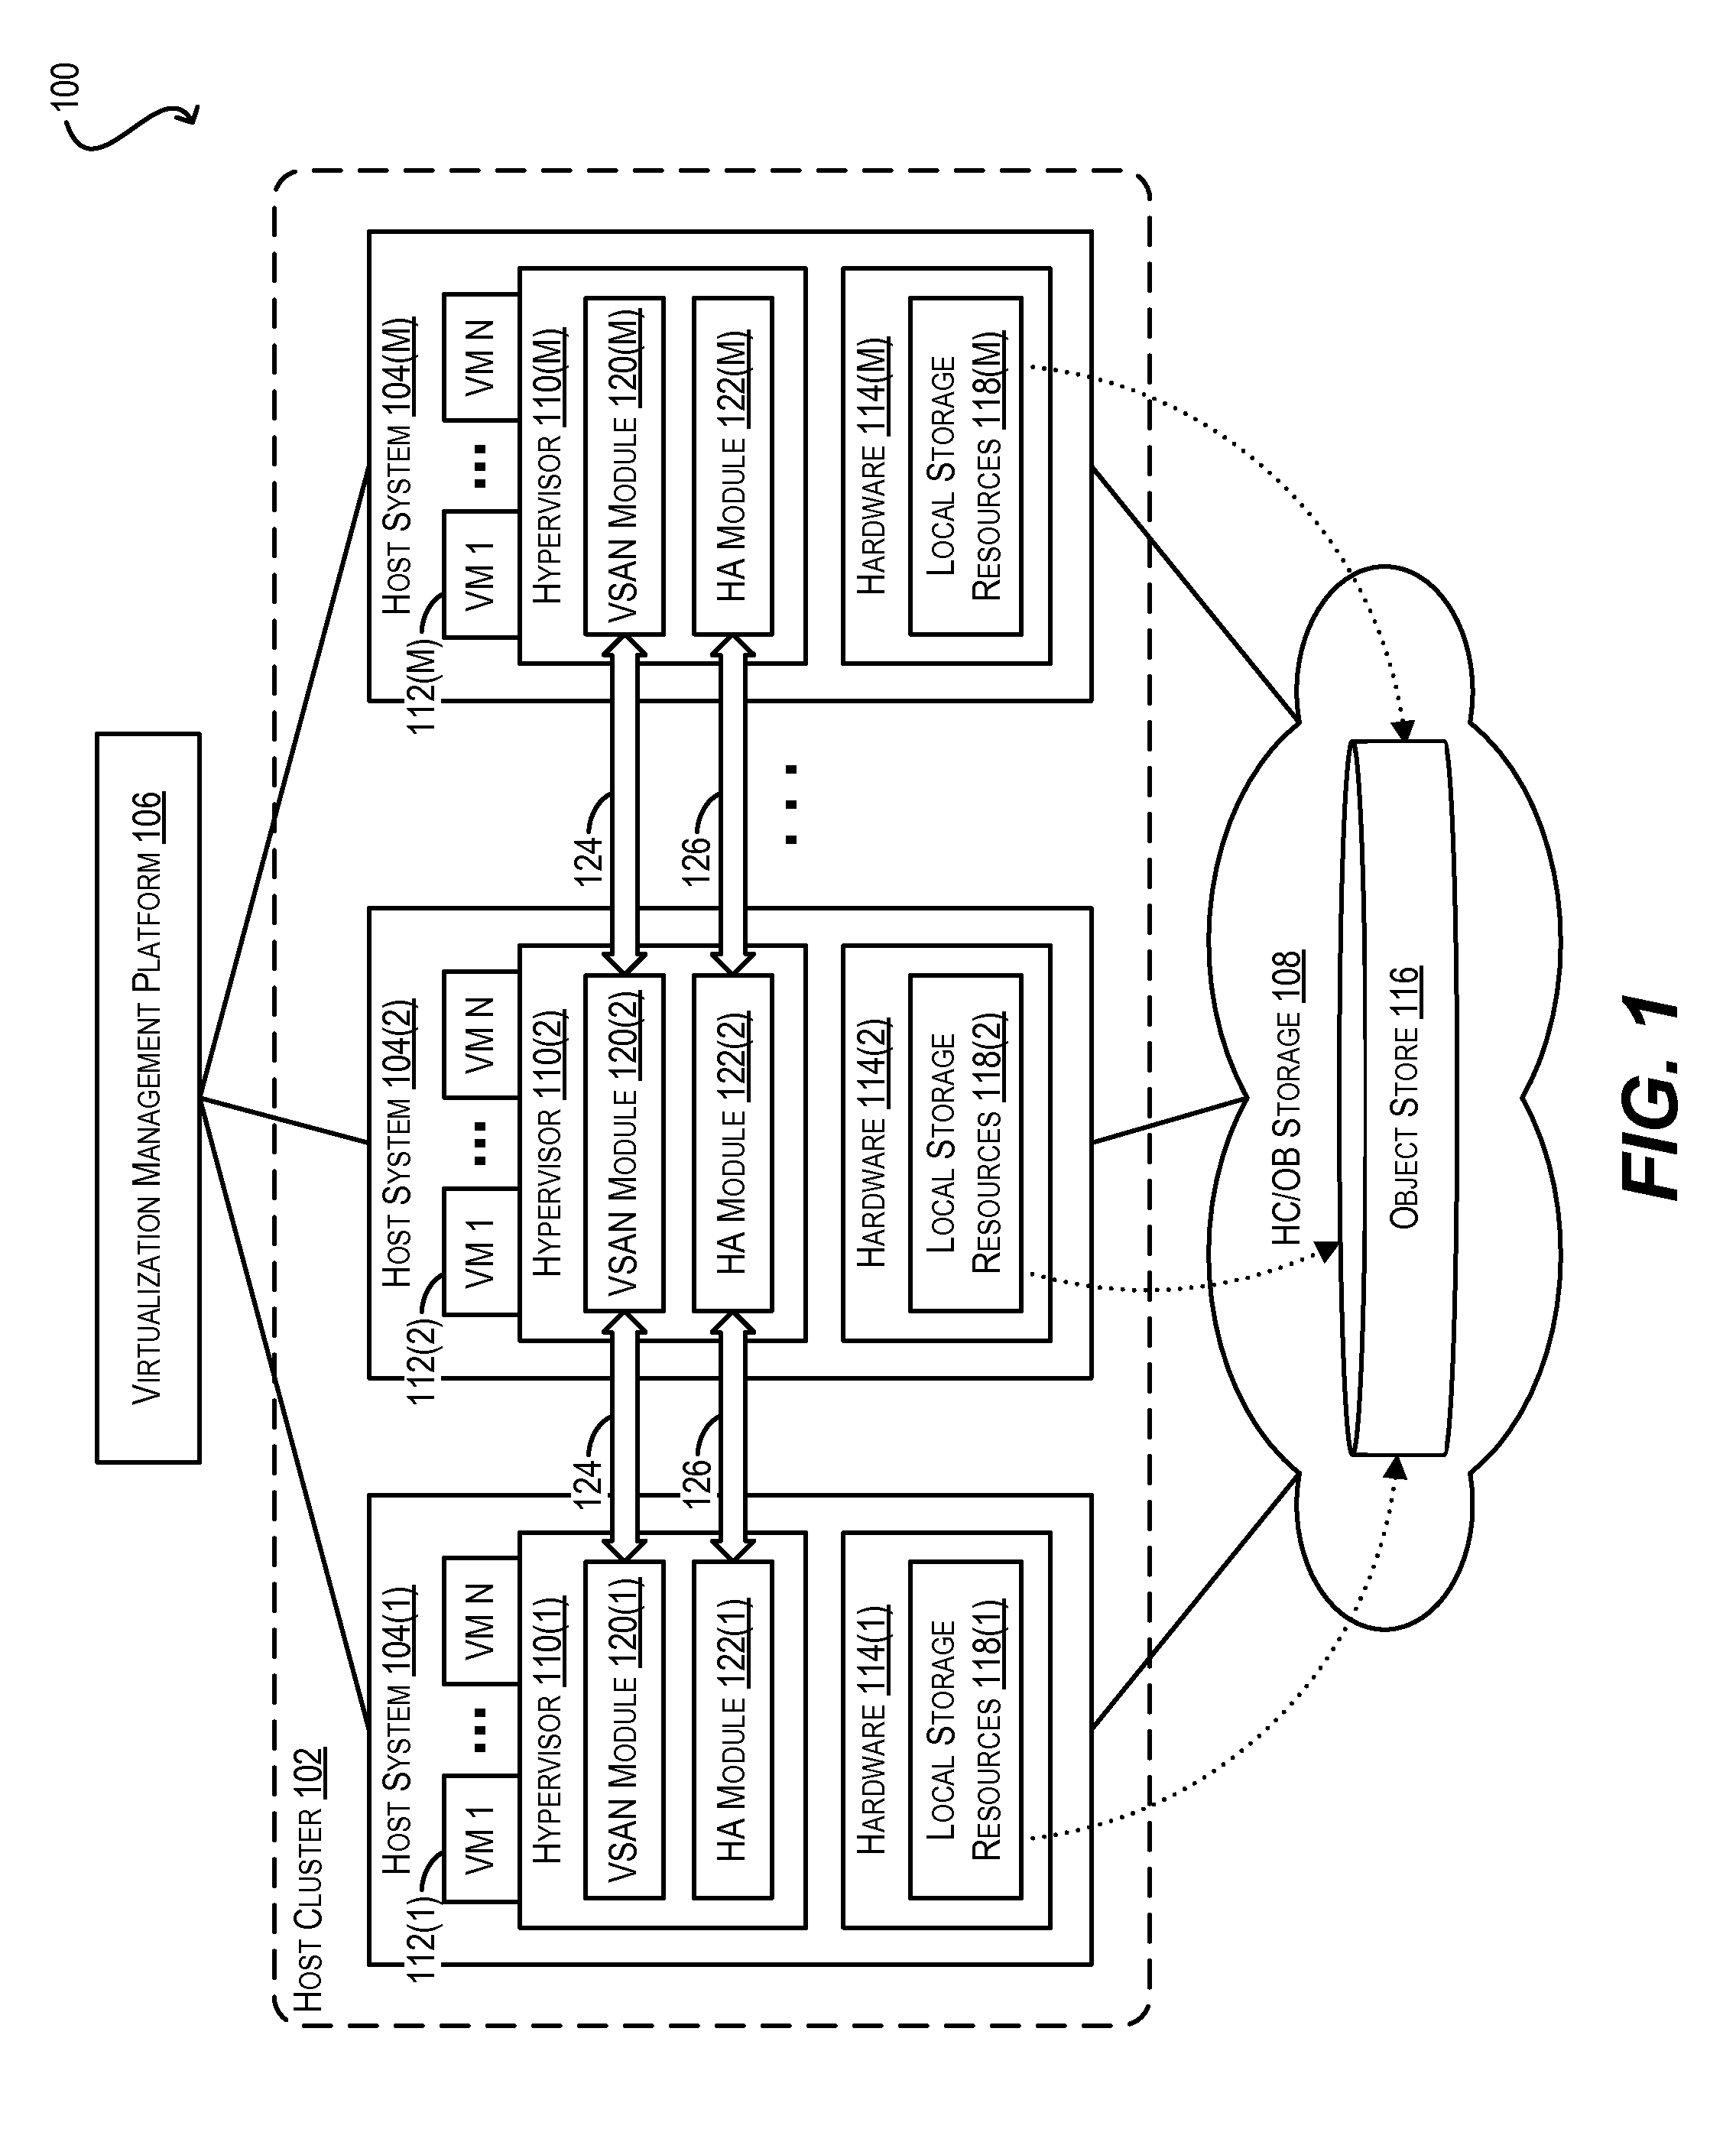 Maintaining high availability during network partitions for virtual machines stored on distributed object-based storage